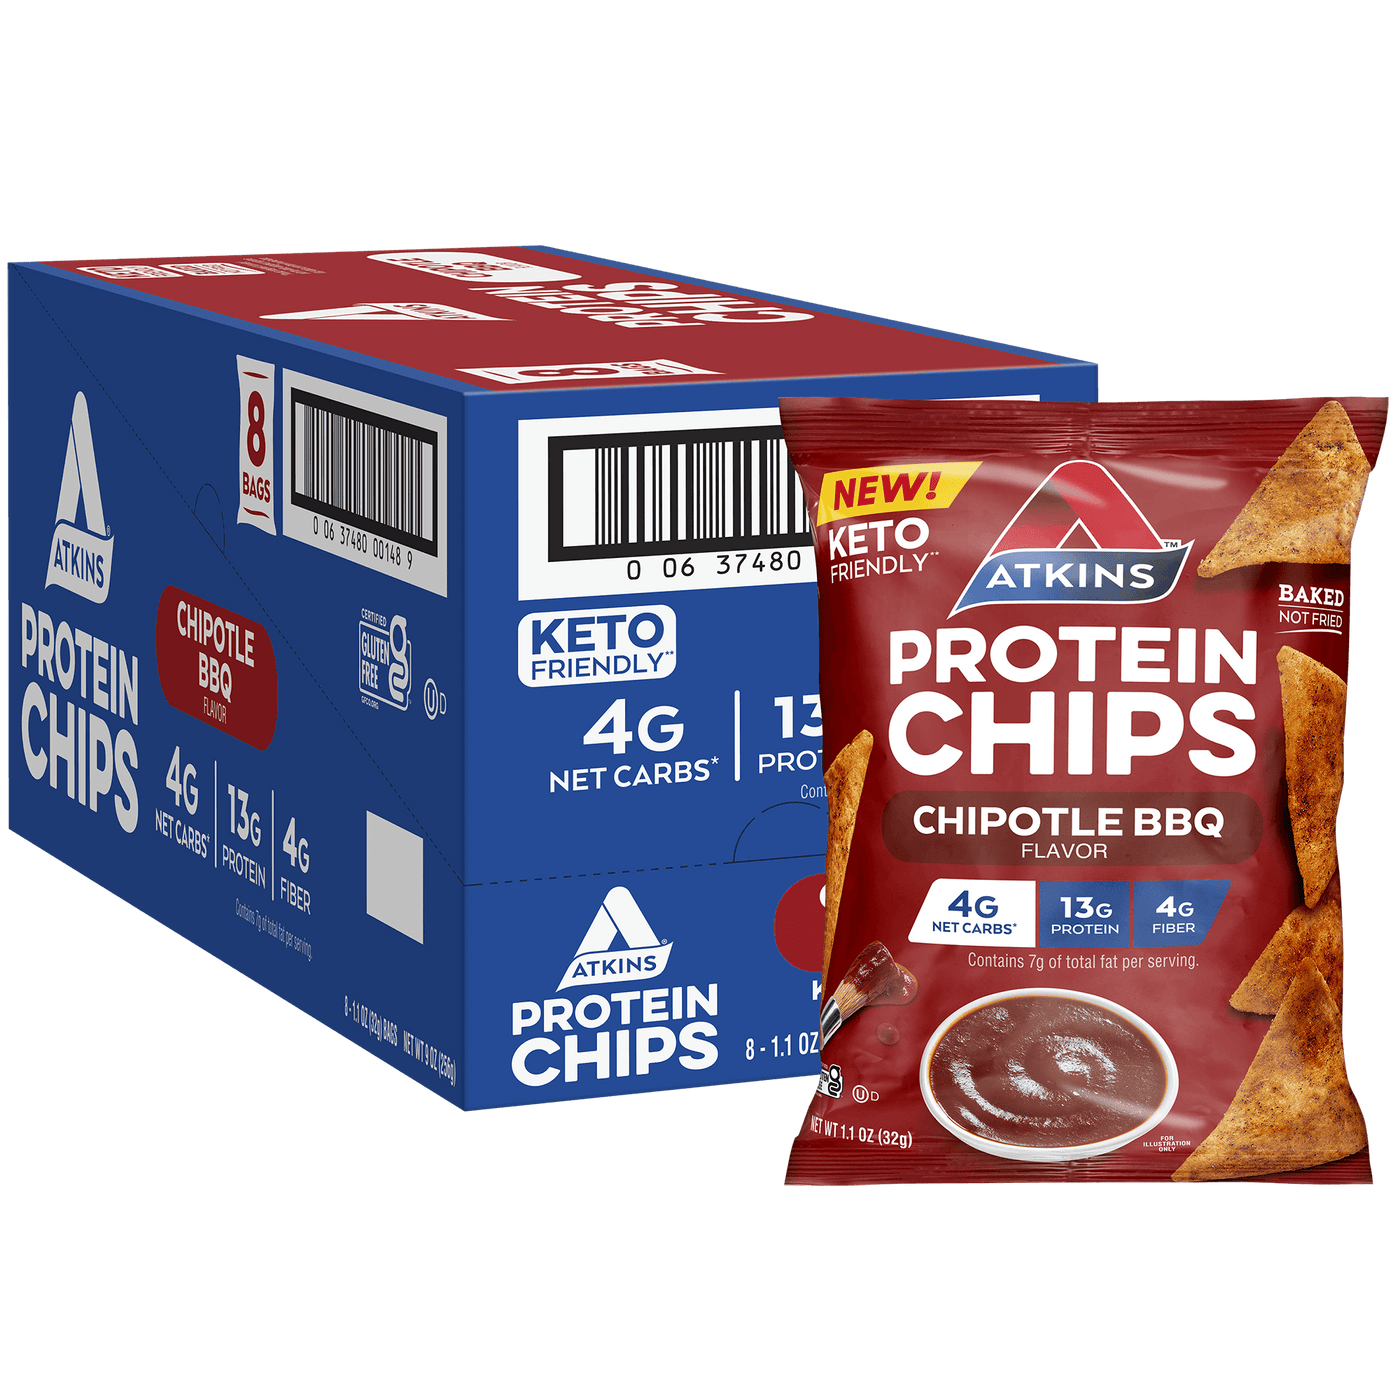 Chipotle BBQ Snack Protein Chips